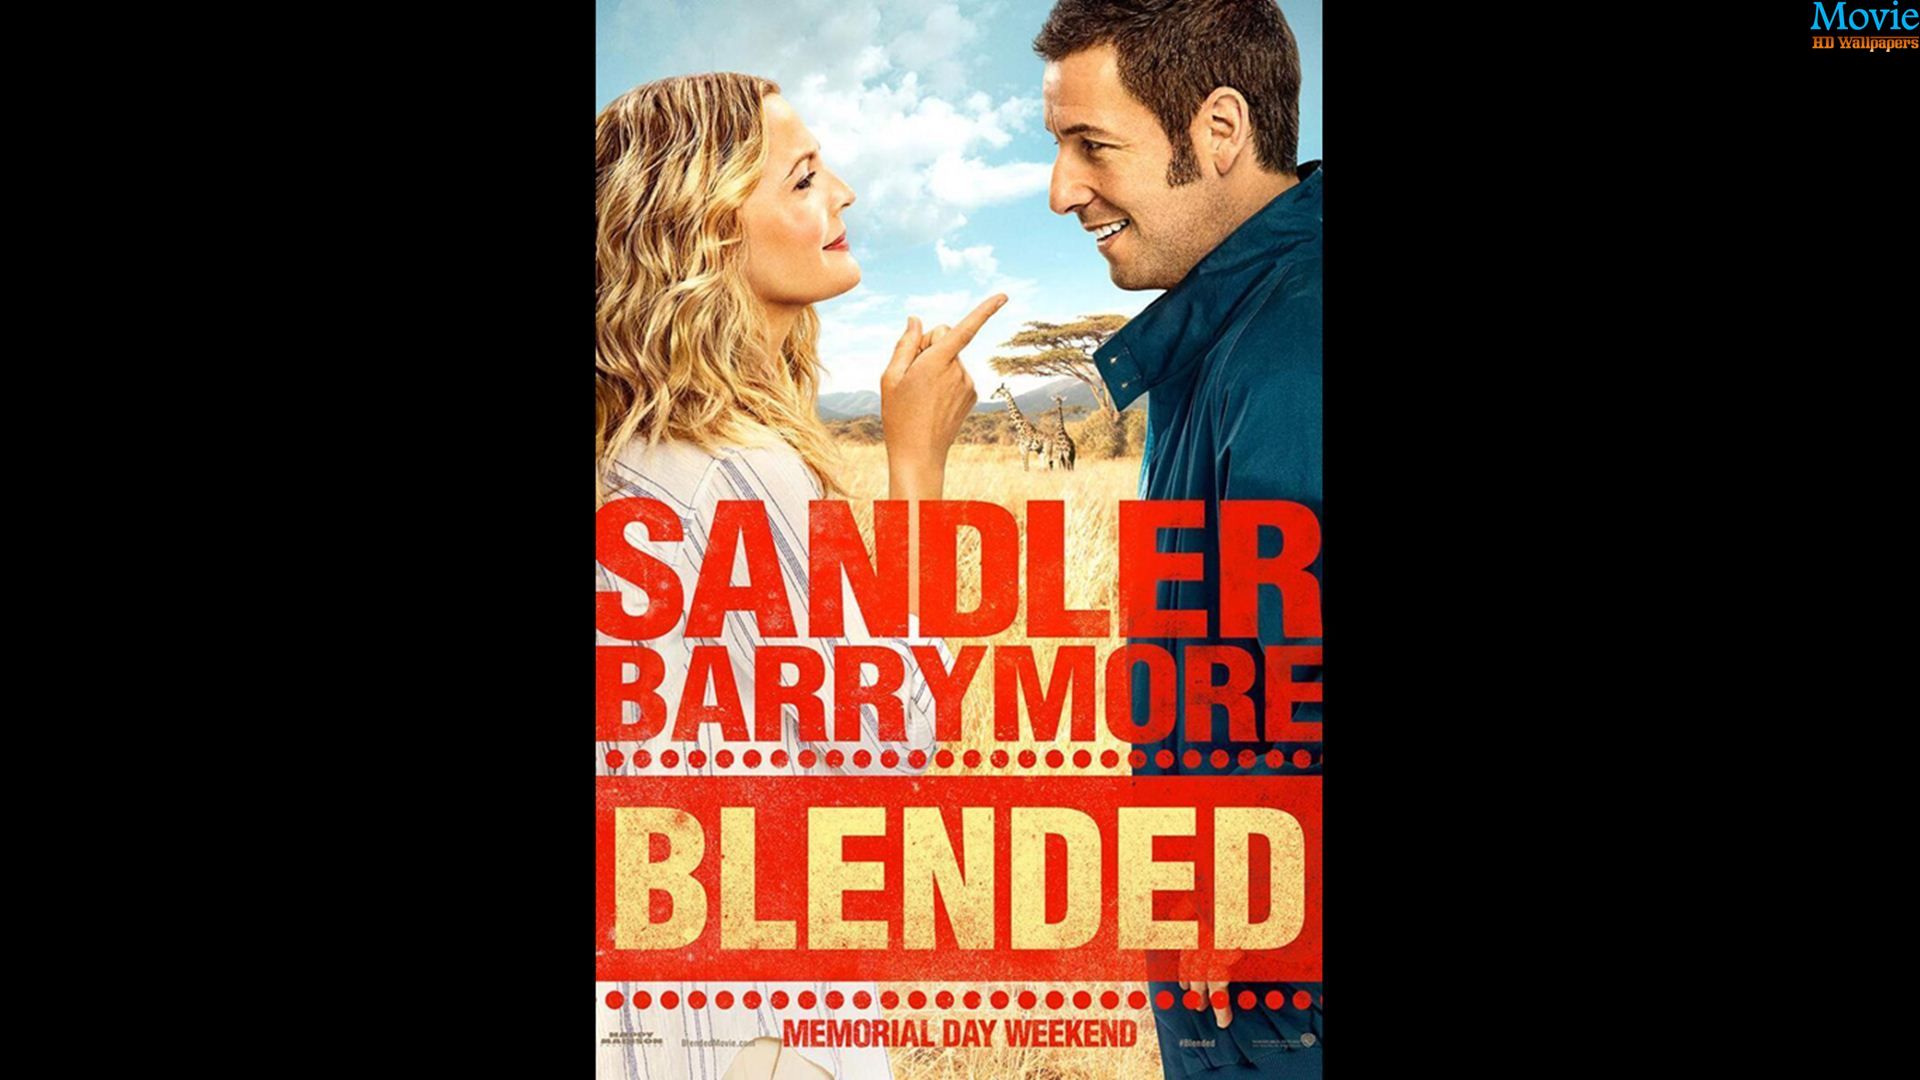 Blended 2014 Movie | Movie HD Wallpapers